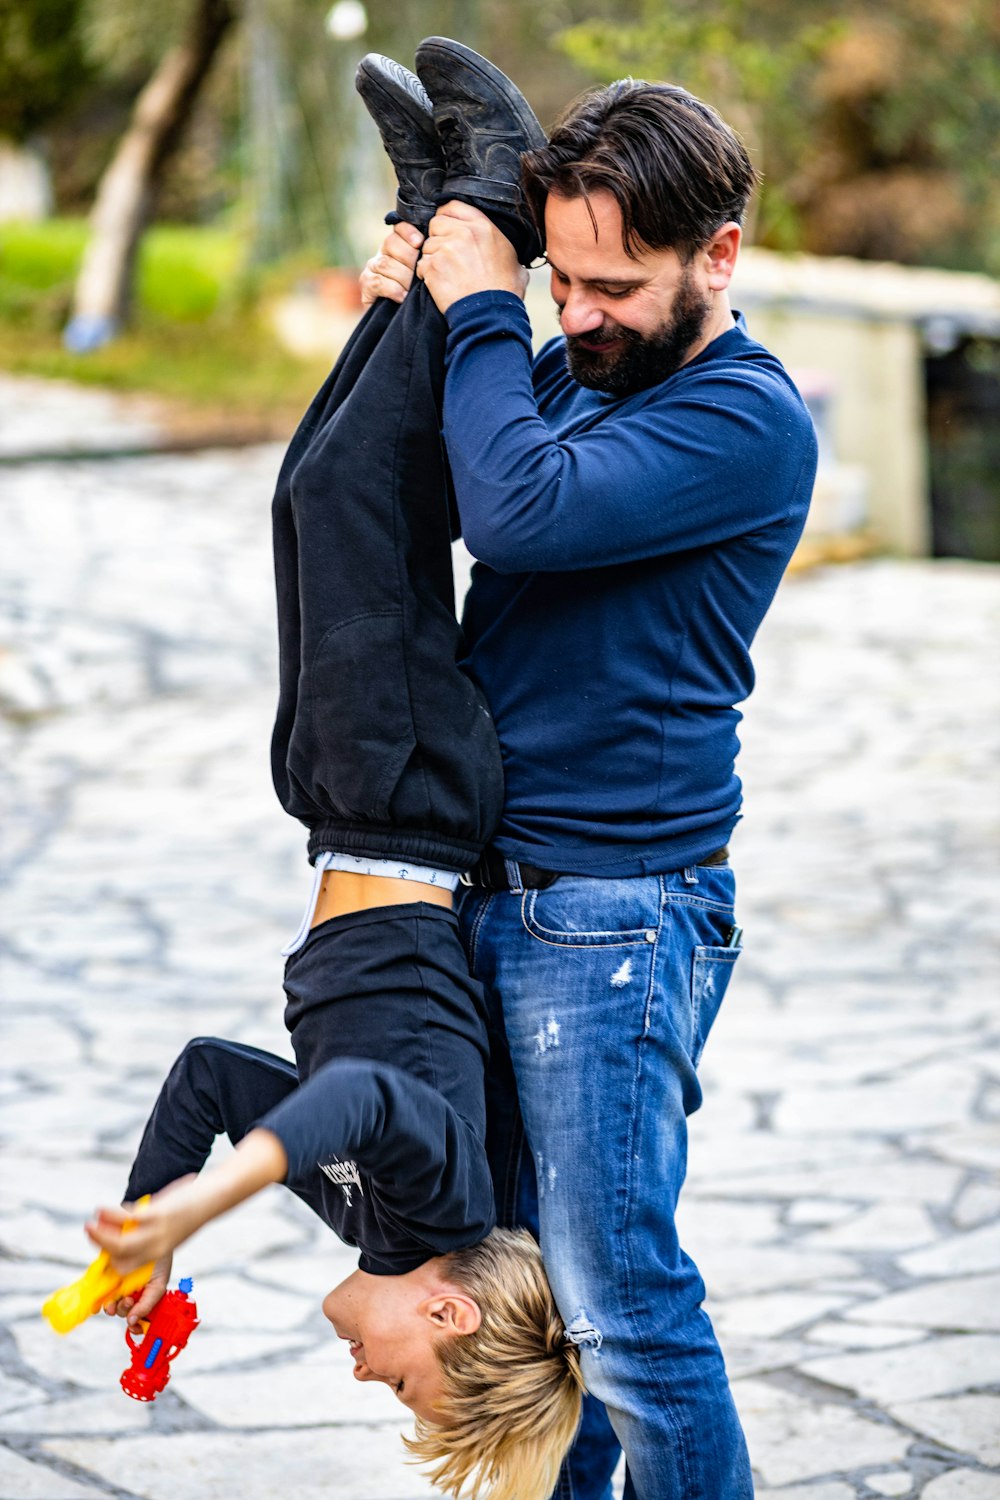 a man and a woman doing a handstand on a skateboard